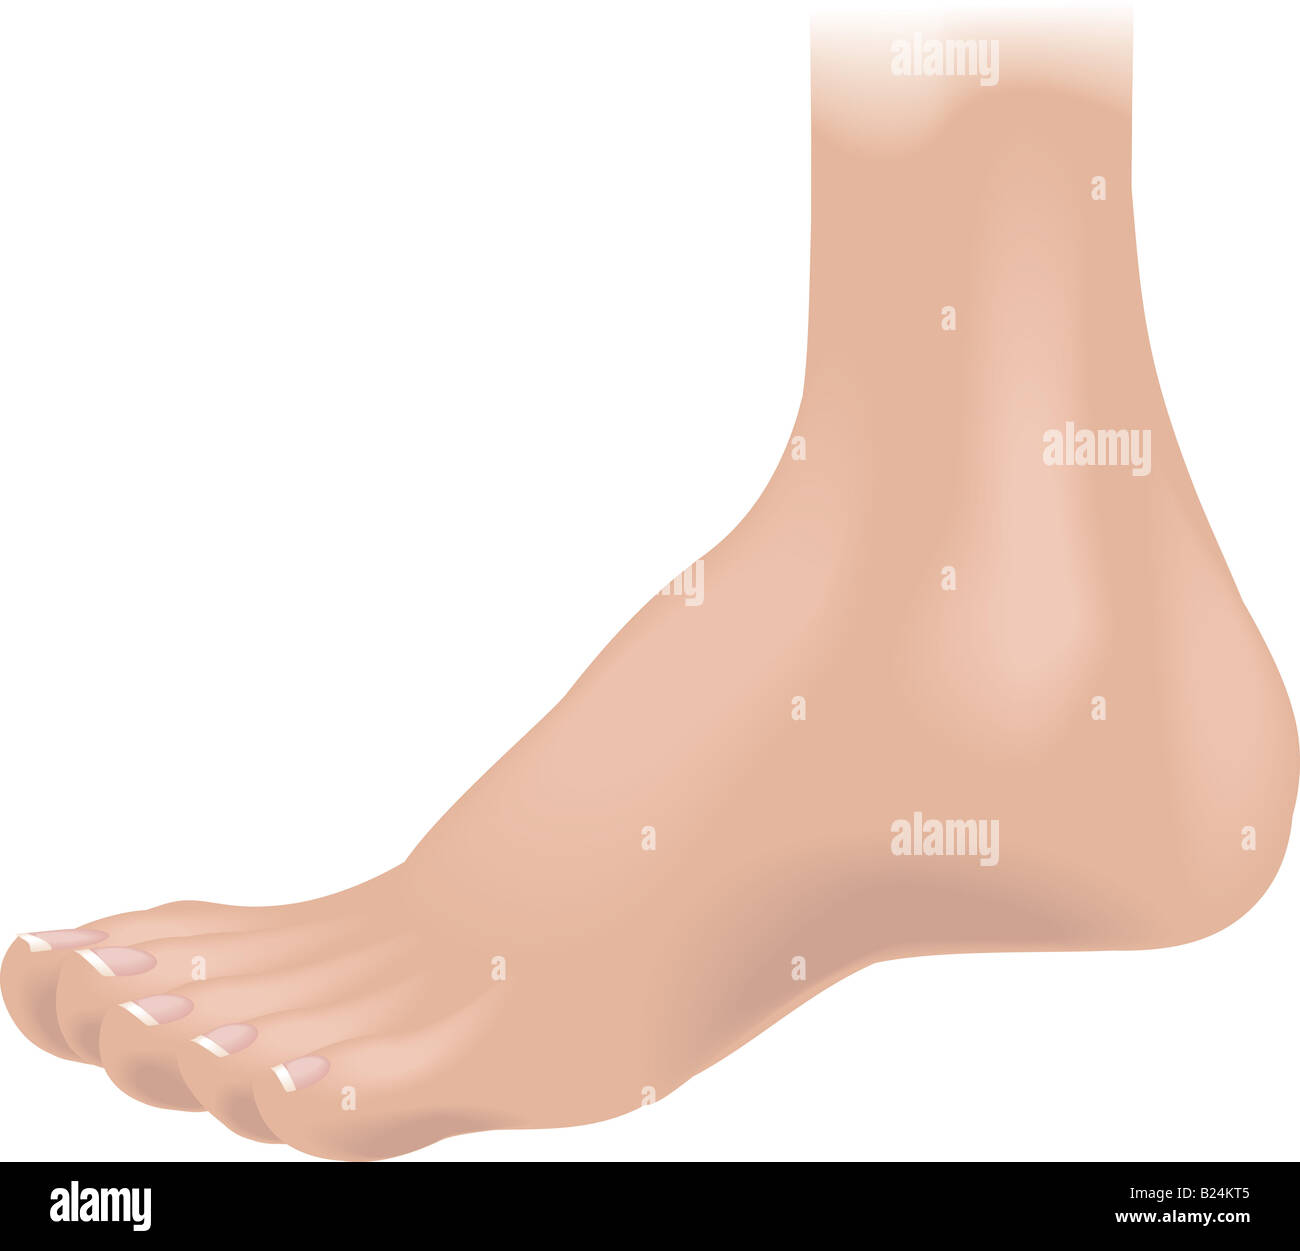 Body parts foot. An illustration of a human foot Stock Photo